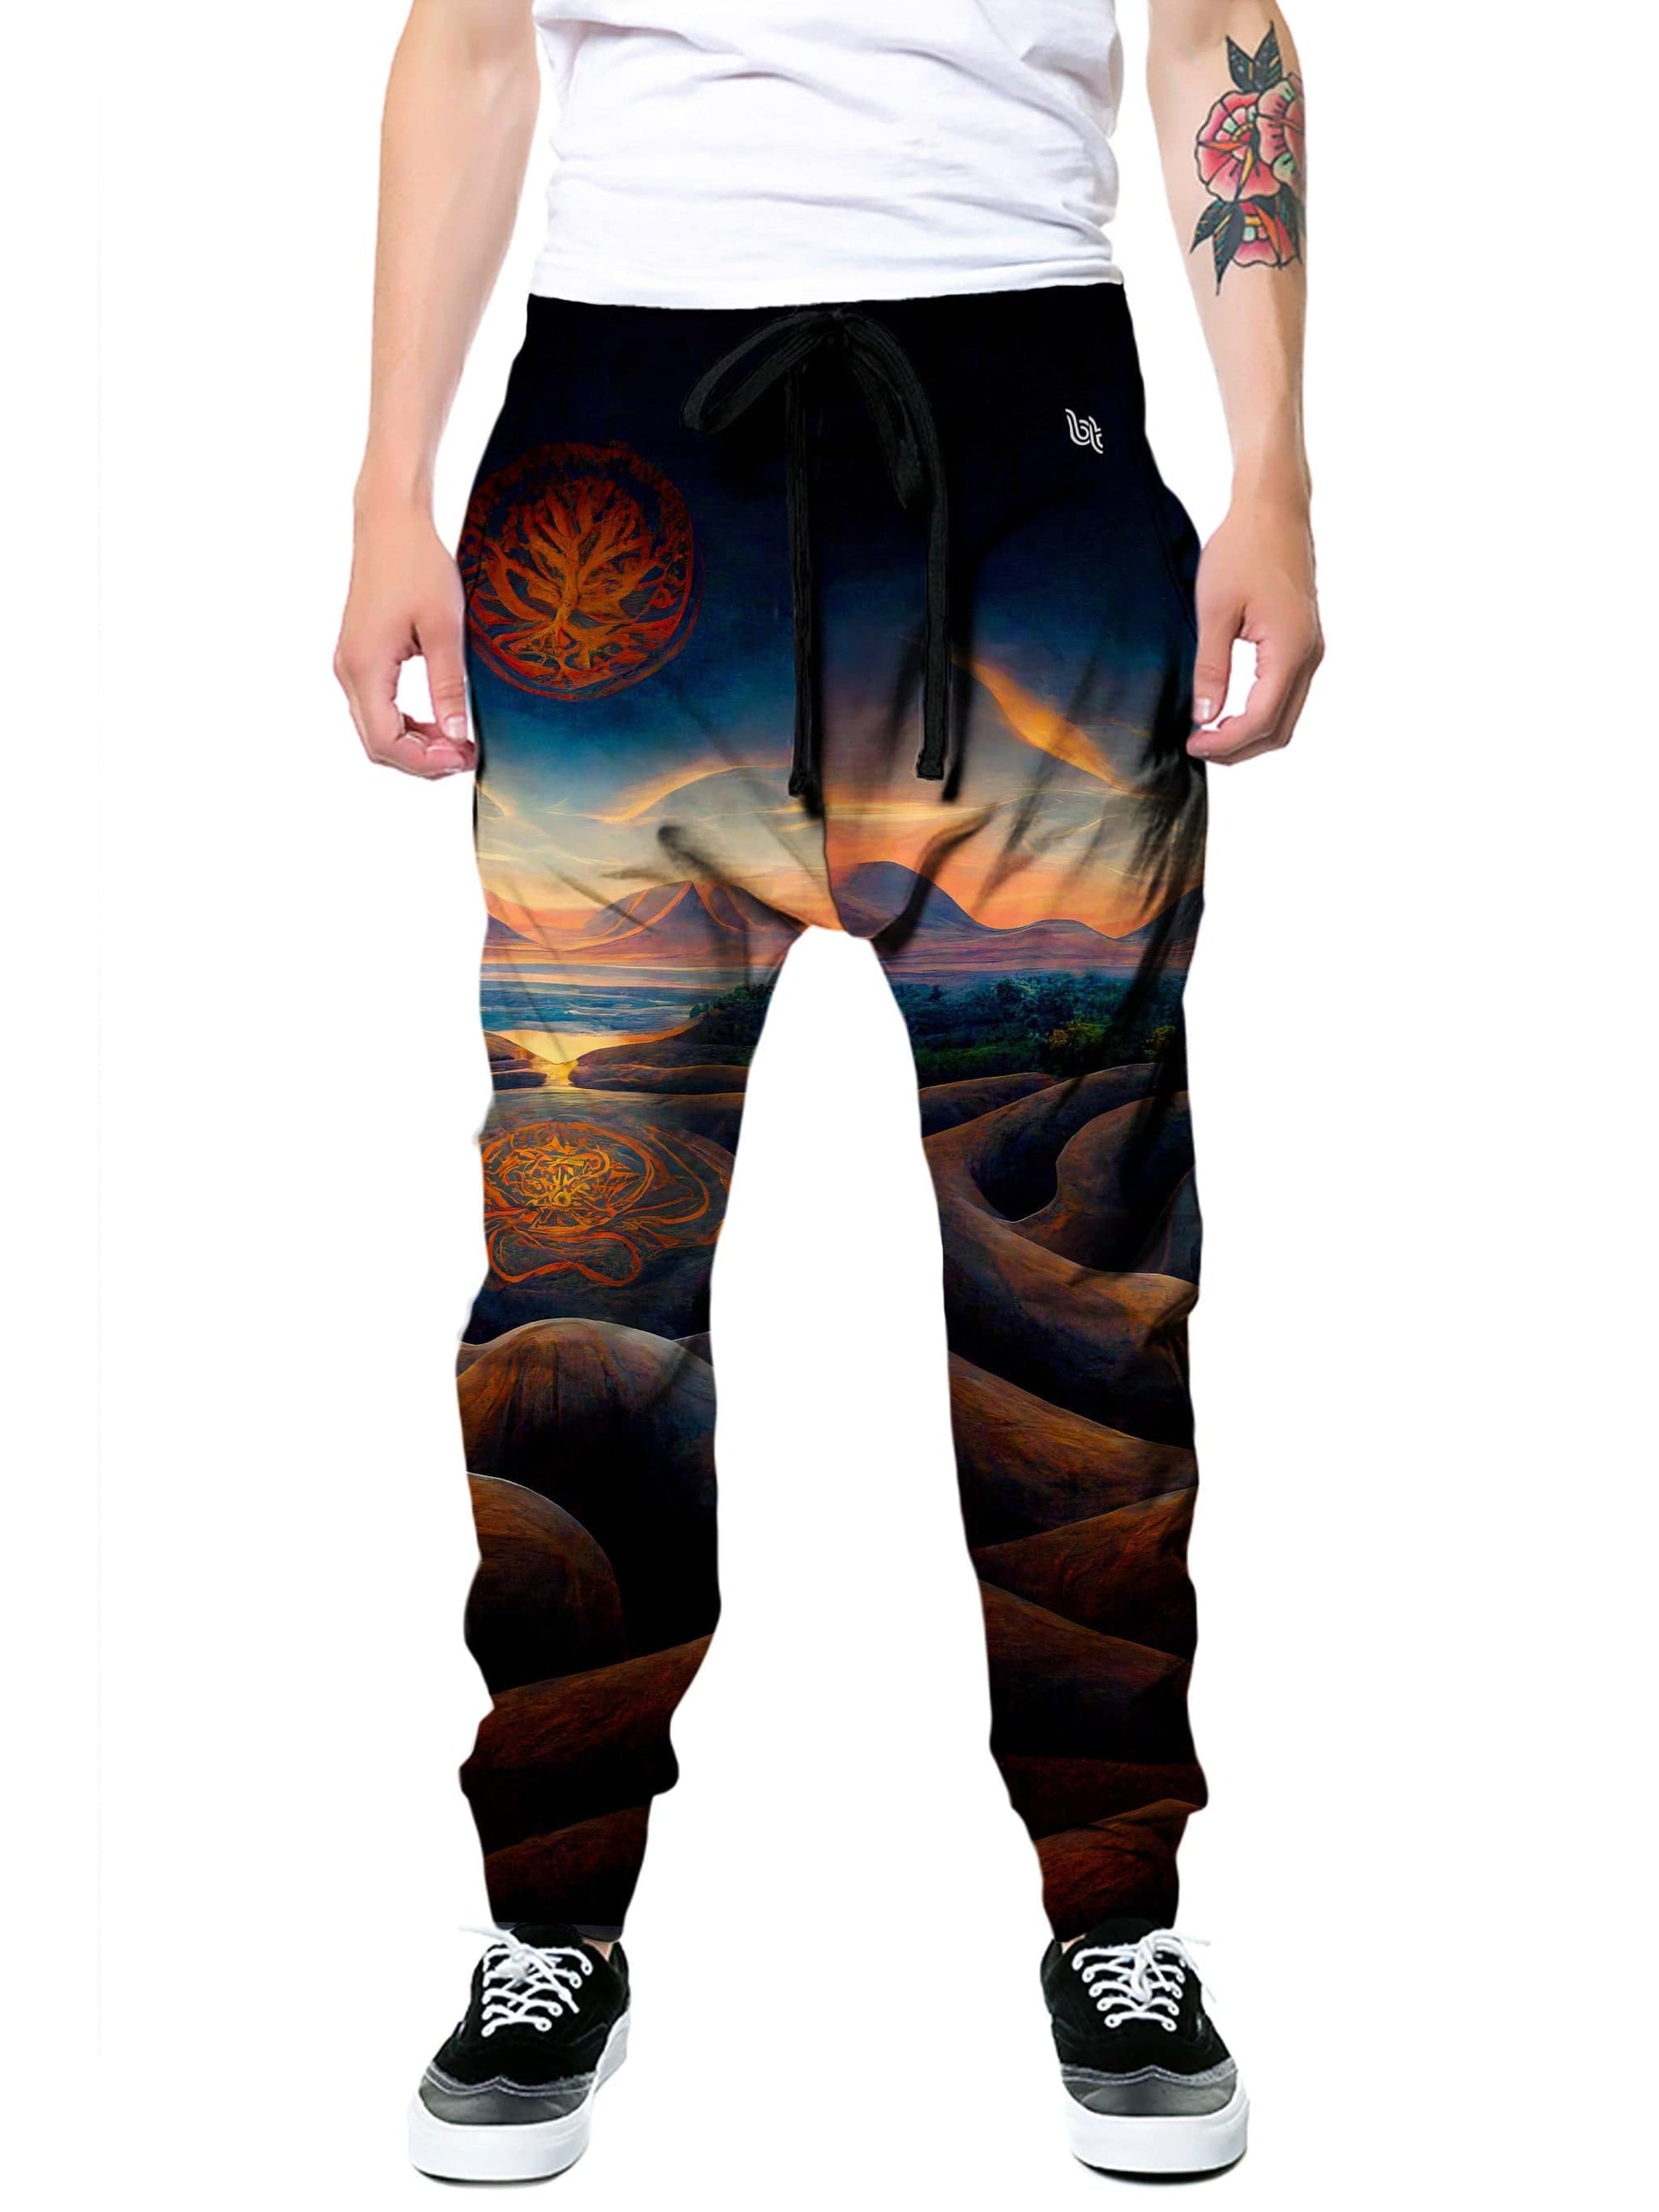 Frightening Tension Joggers, Gratefully Dyed, | iEDM